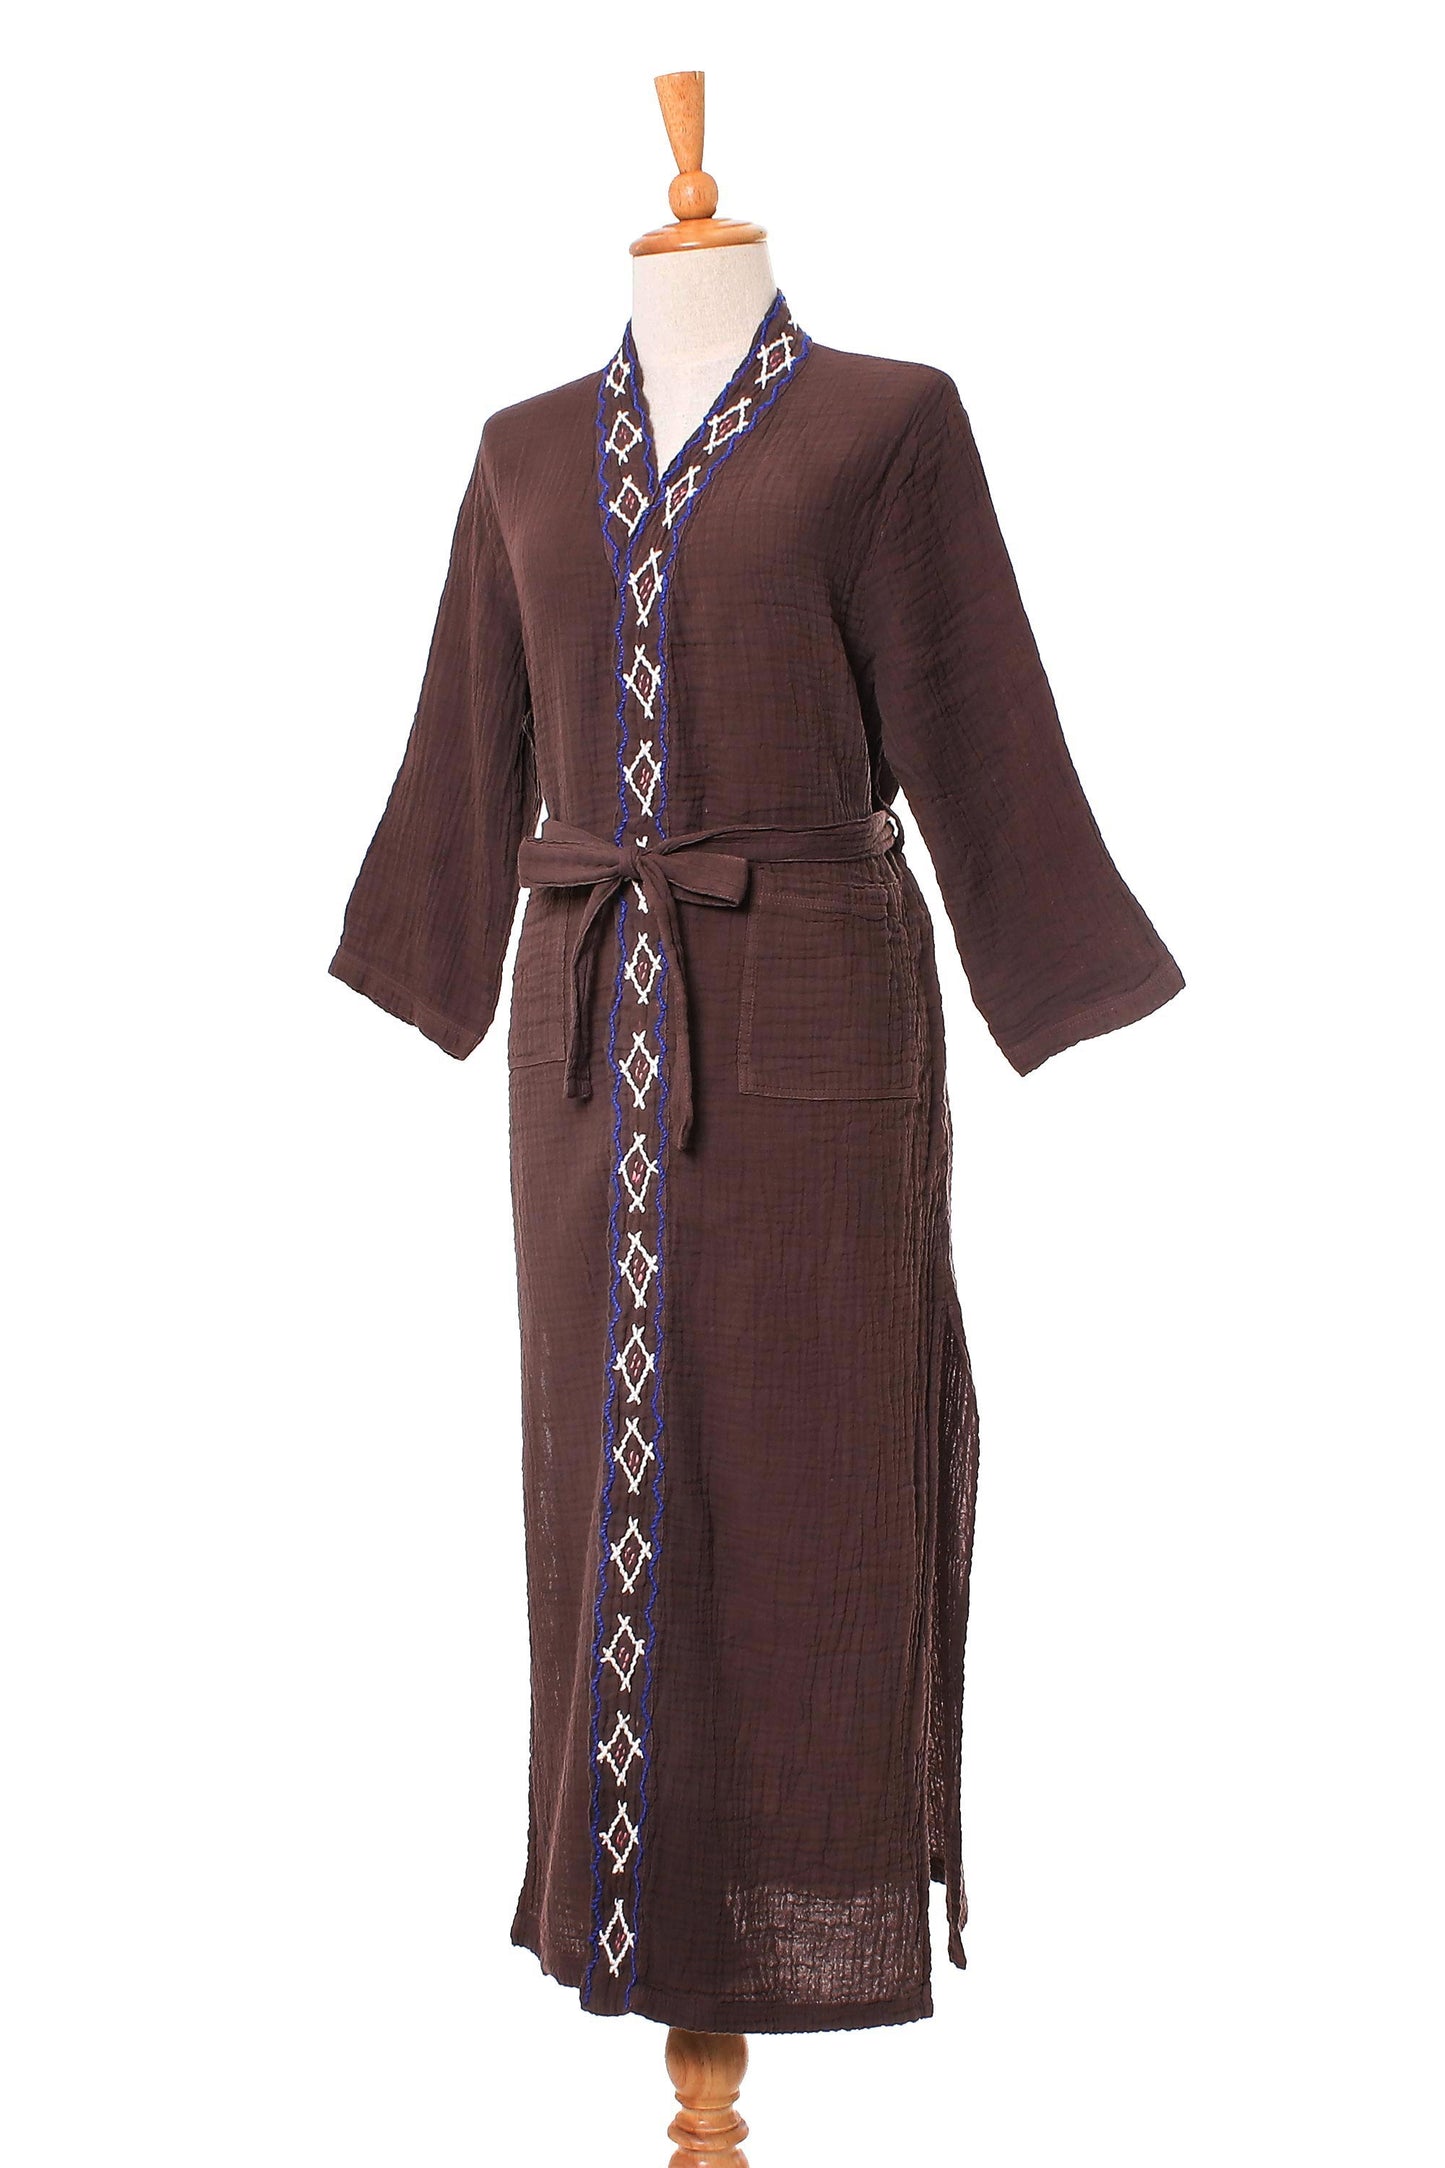 Nature Relaxation Diamond Embroidered Cotton Robe in Chestnut from Thailand